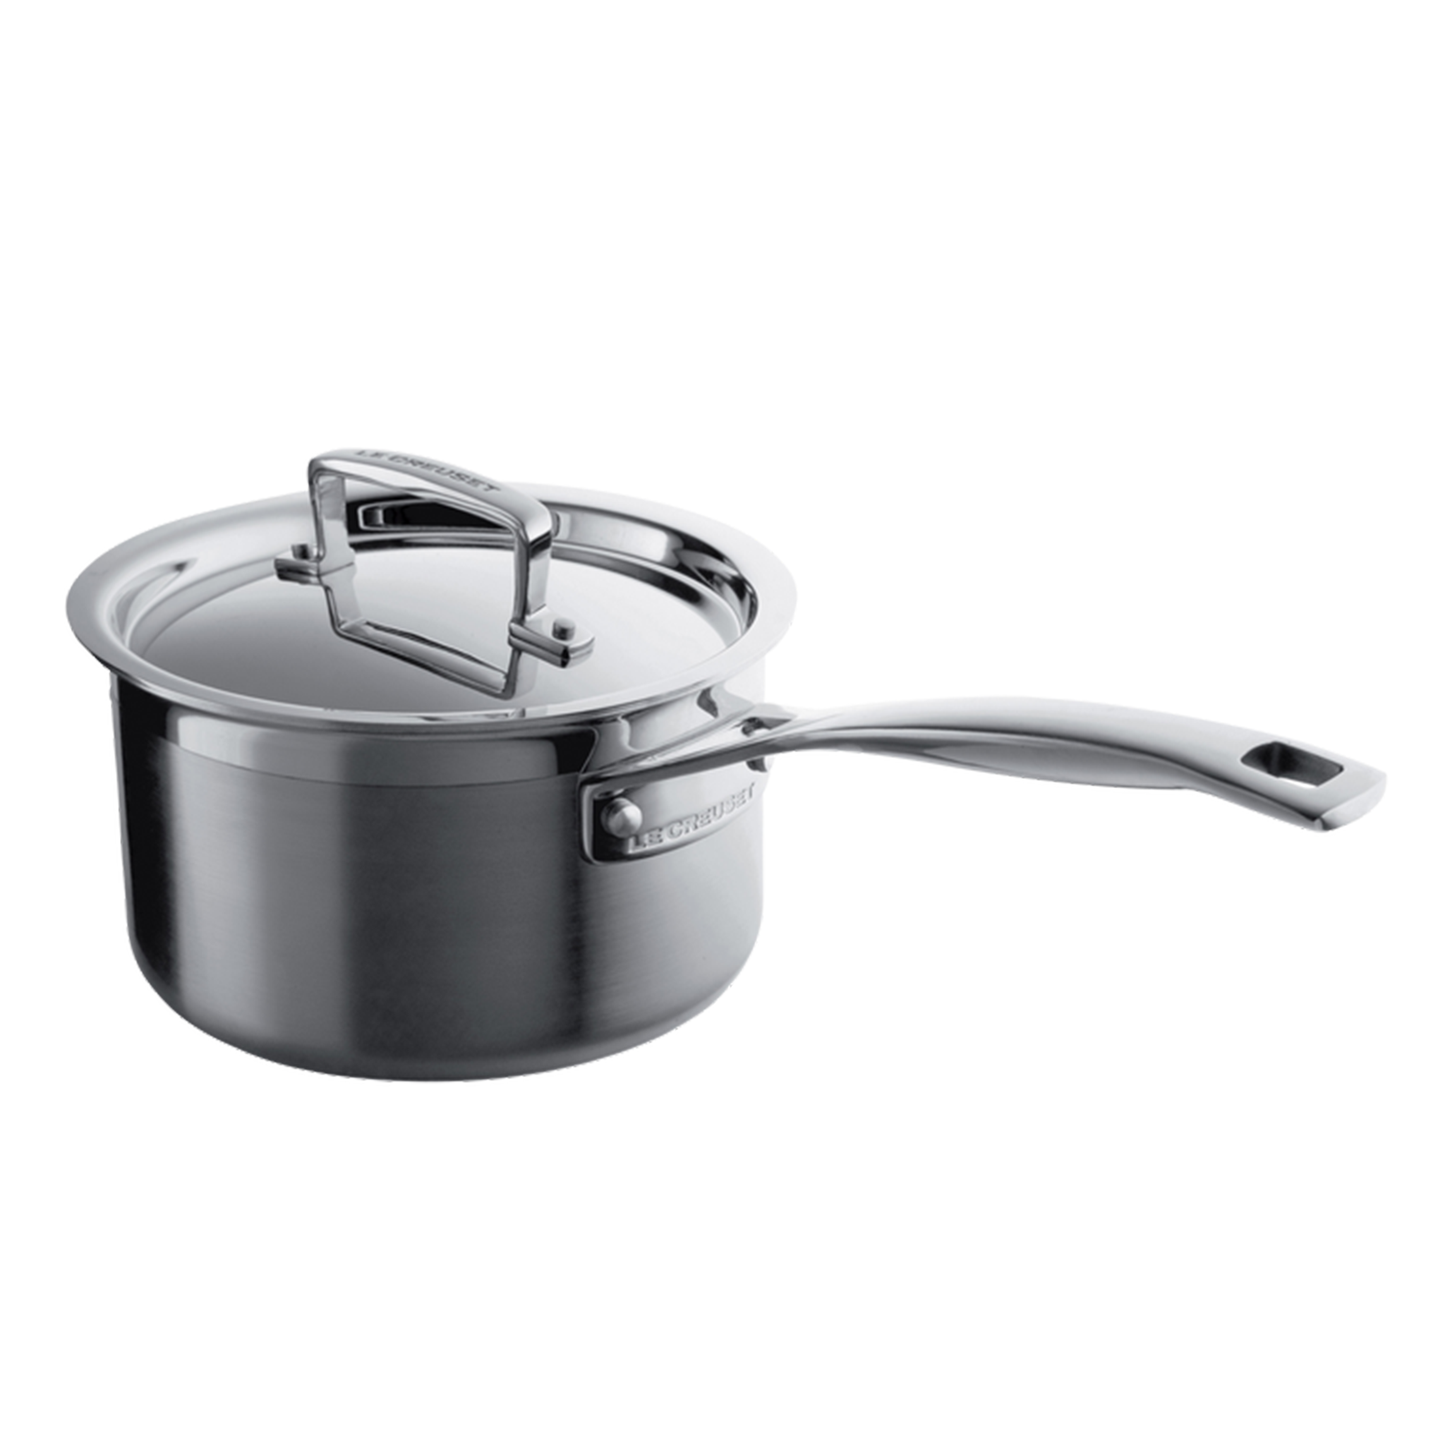 a stainless steel saucepan with stainless steel lid